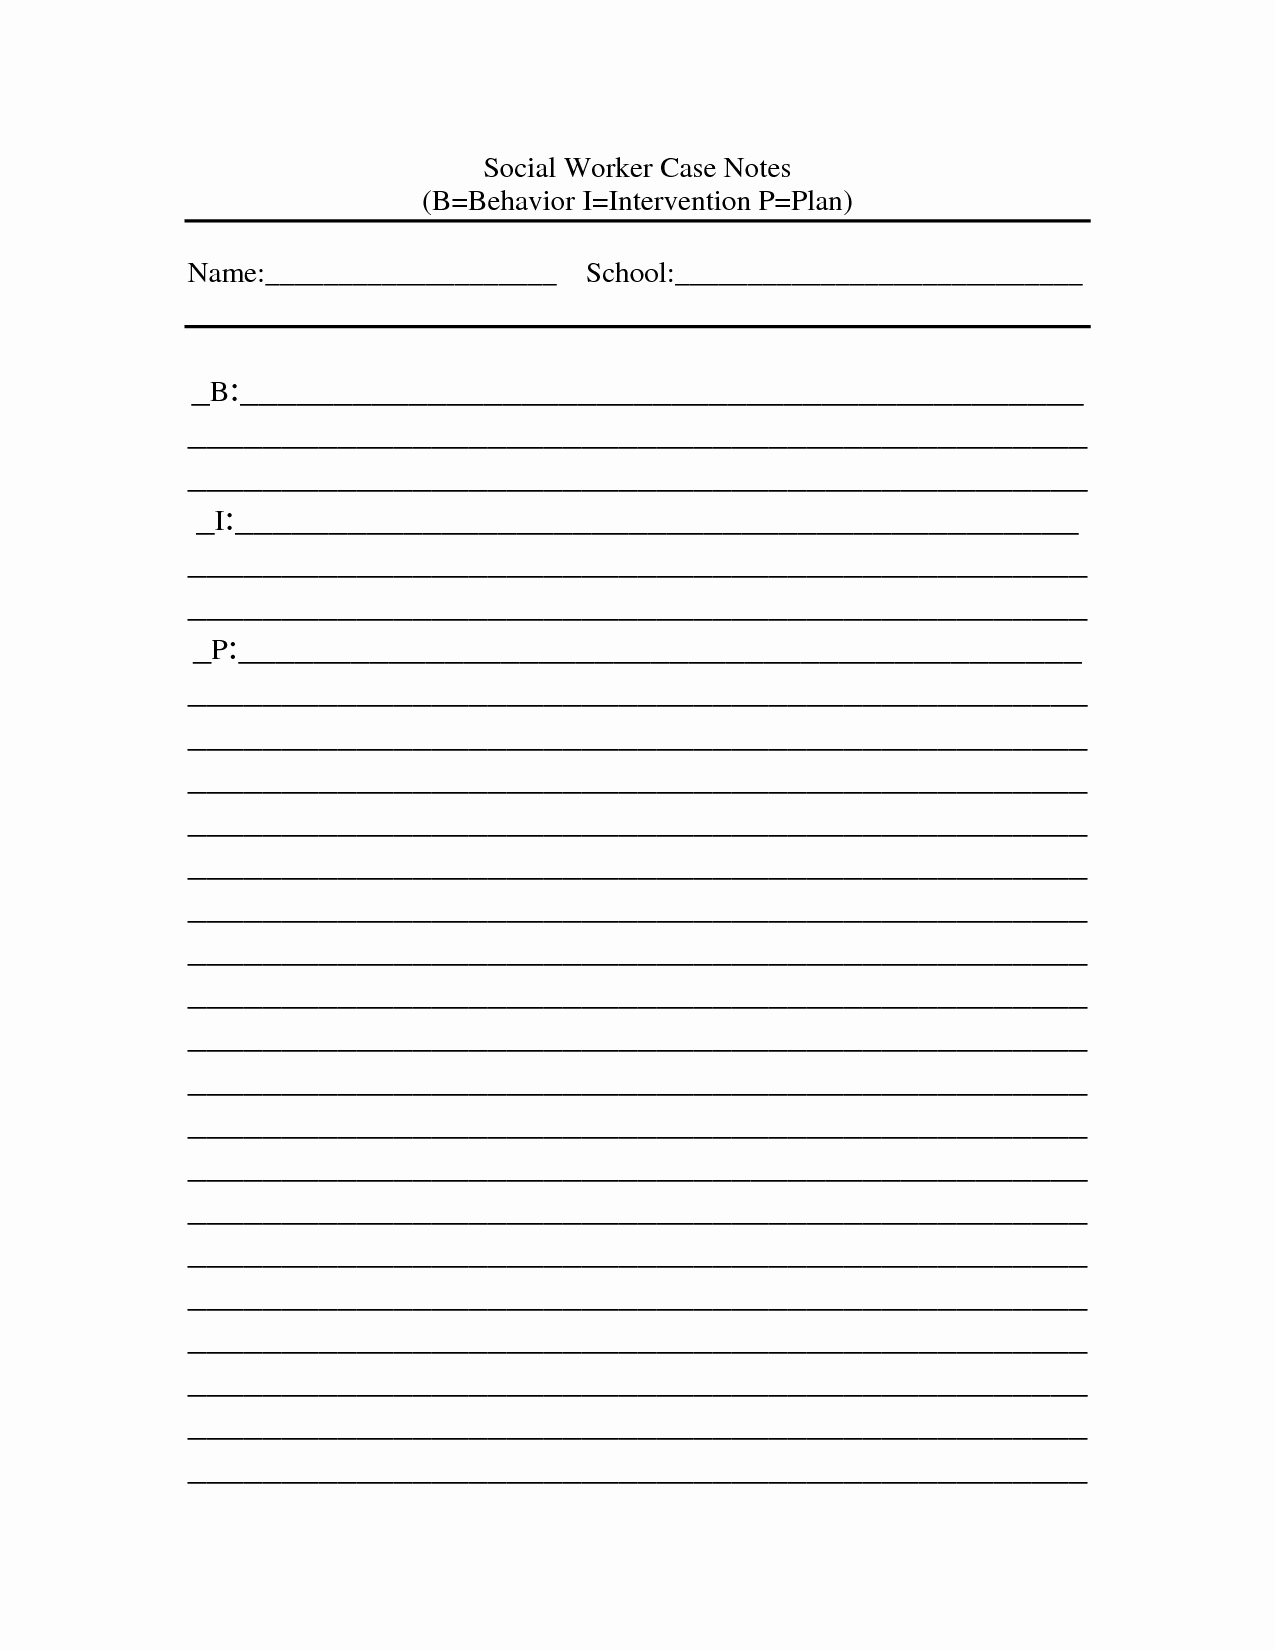 Case Note Template social Work Beautiful 10 Best Of Case Note form Case Management Notes